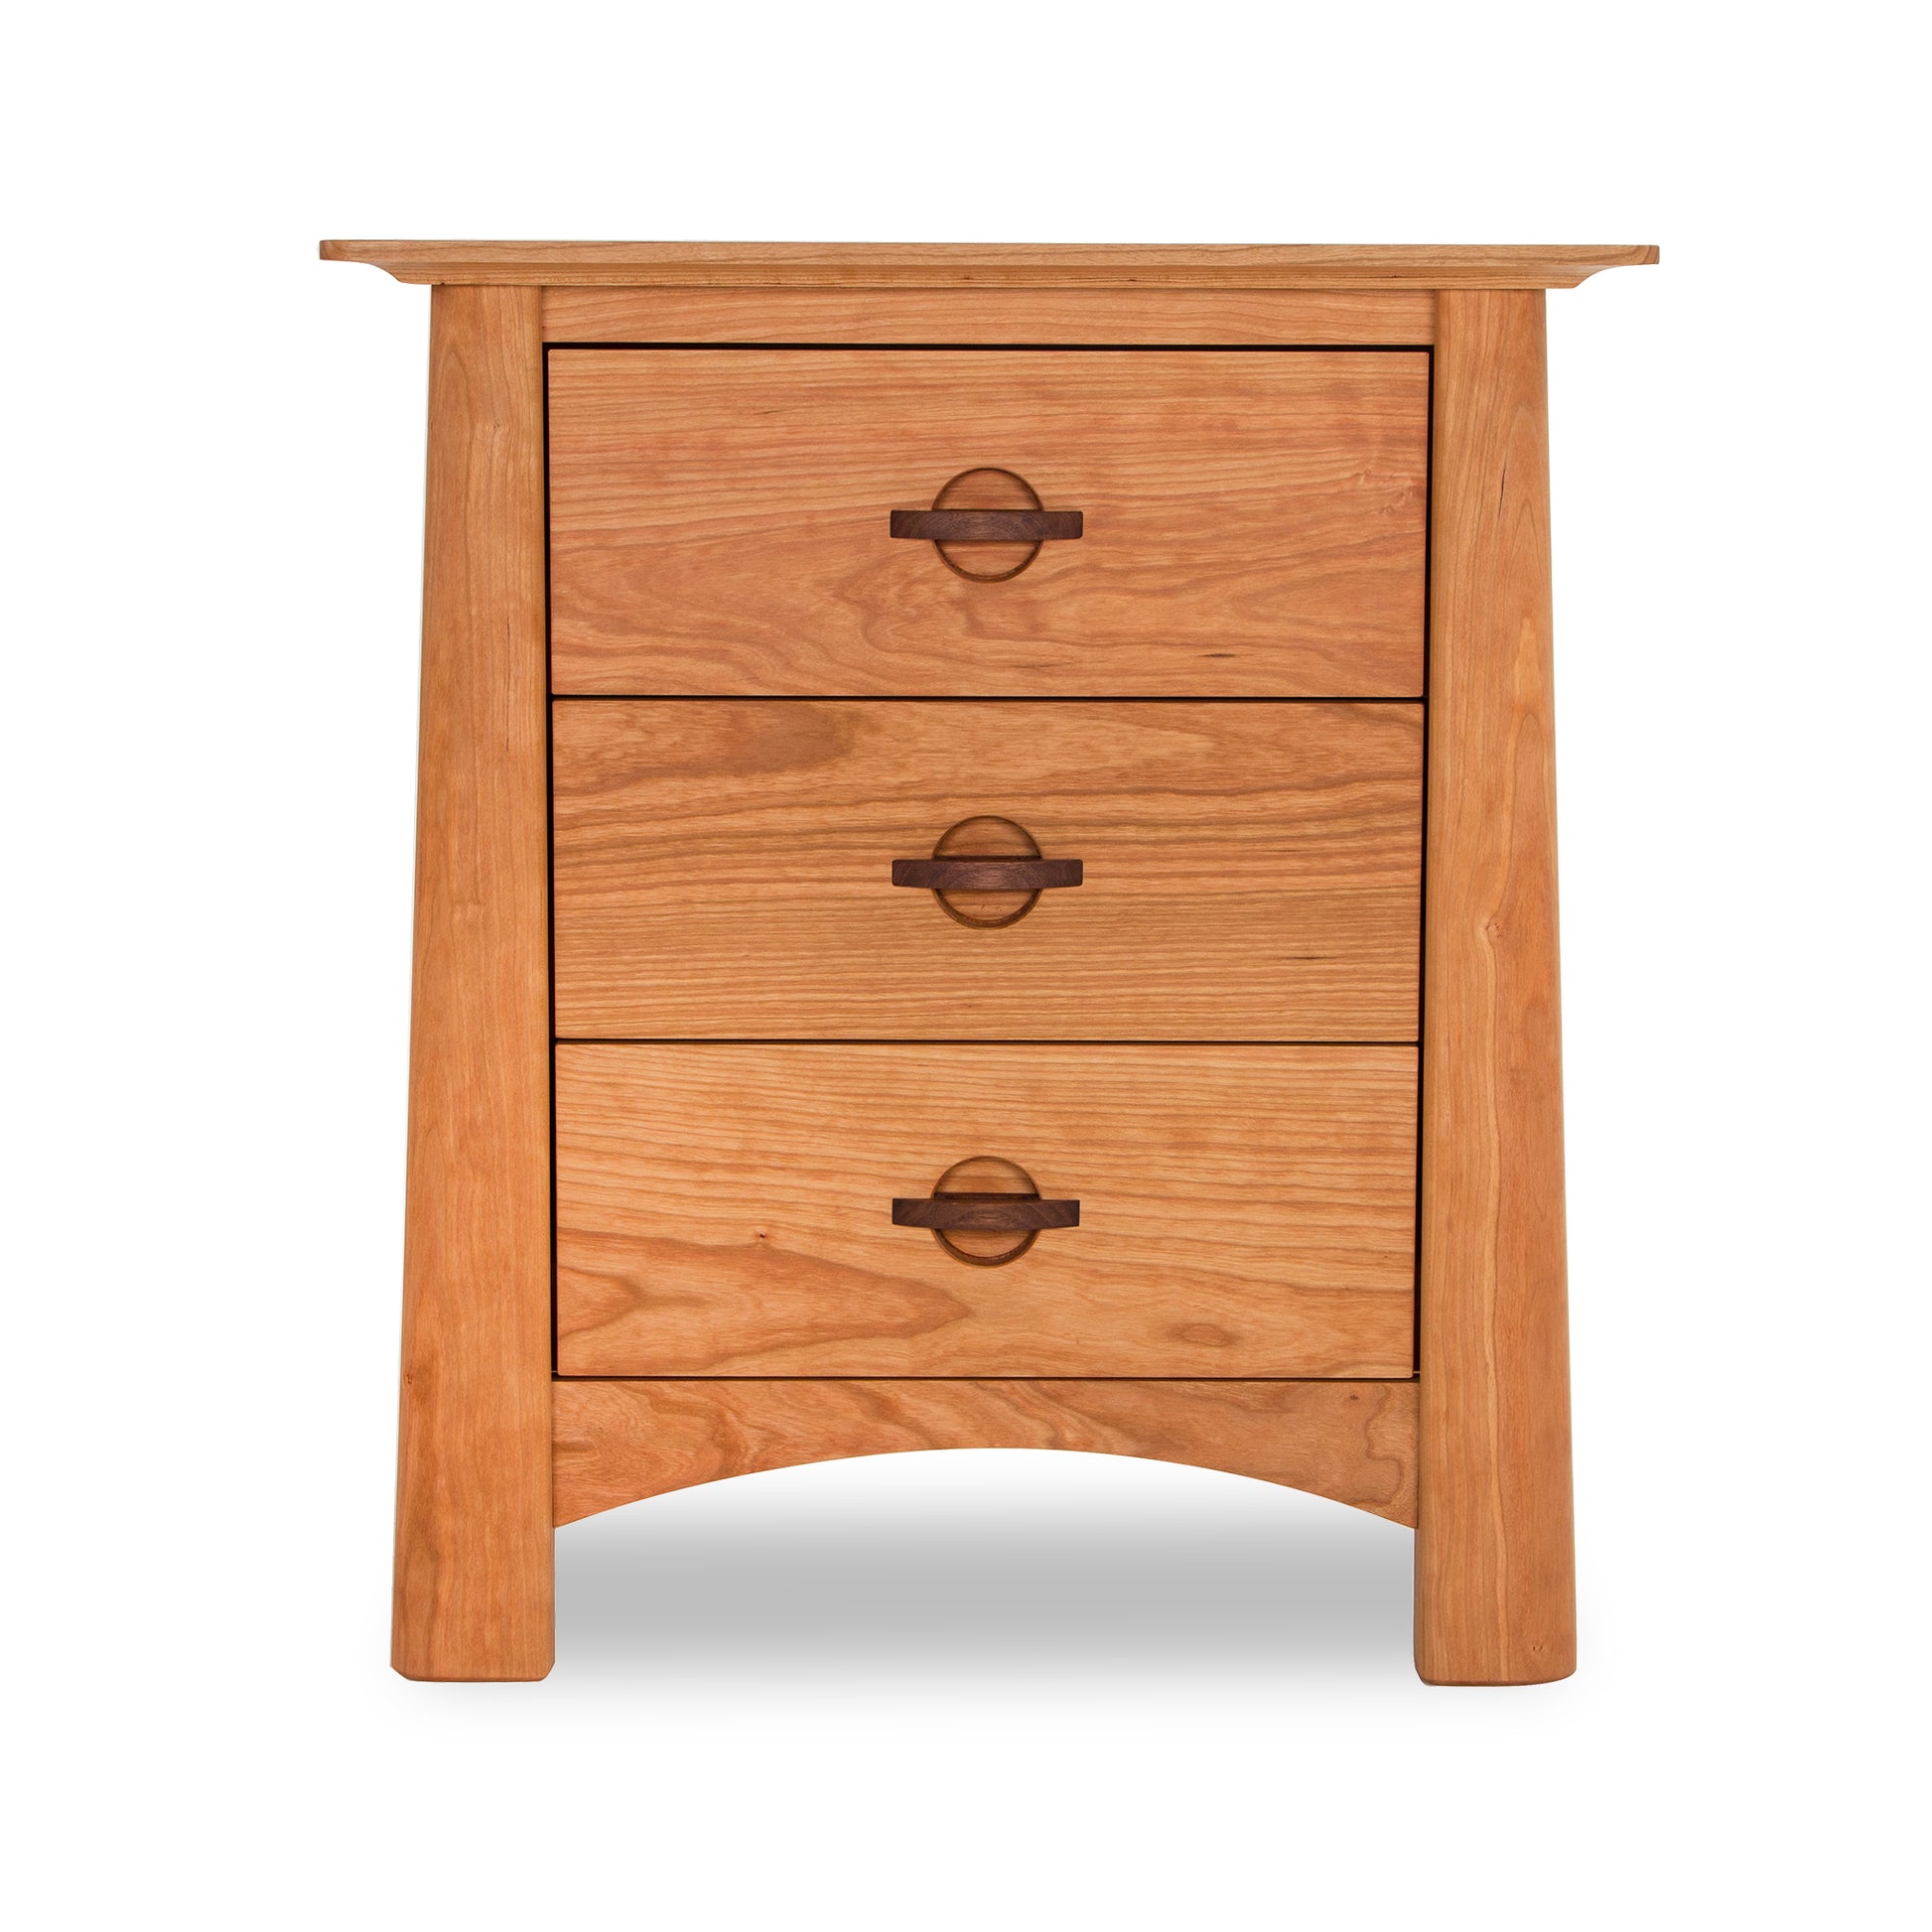 Cherry Moon 3-Drawer Nightstand by Maple Corner Woodworks – Handcrafted Vermont Solid Wood Furniture with Natural Finish, Sustainable Hardwood, Round Metal Handles, Flat Top, and Curved Legs.